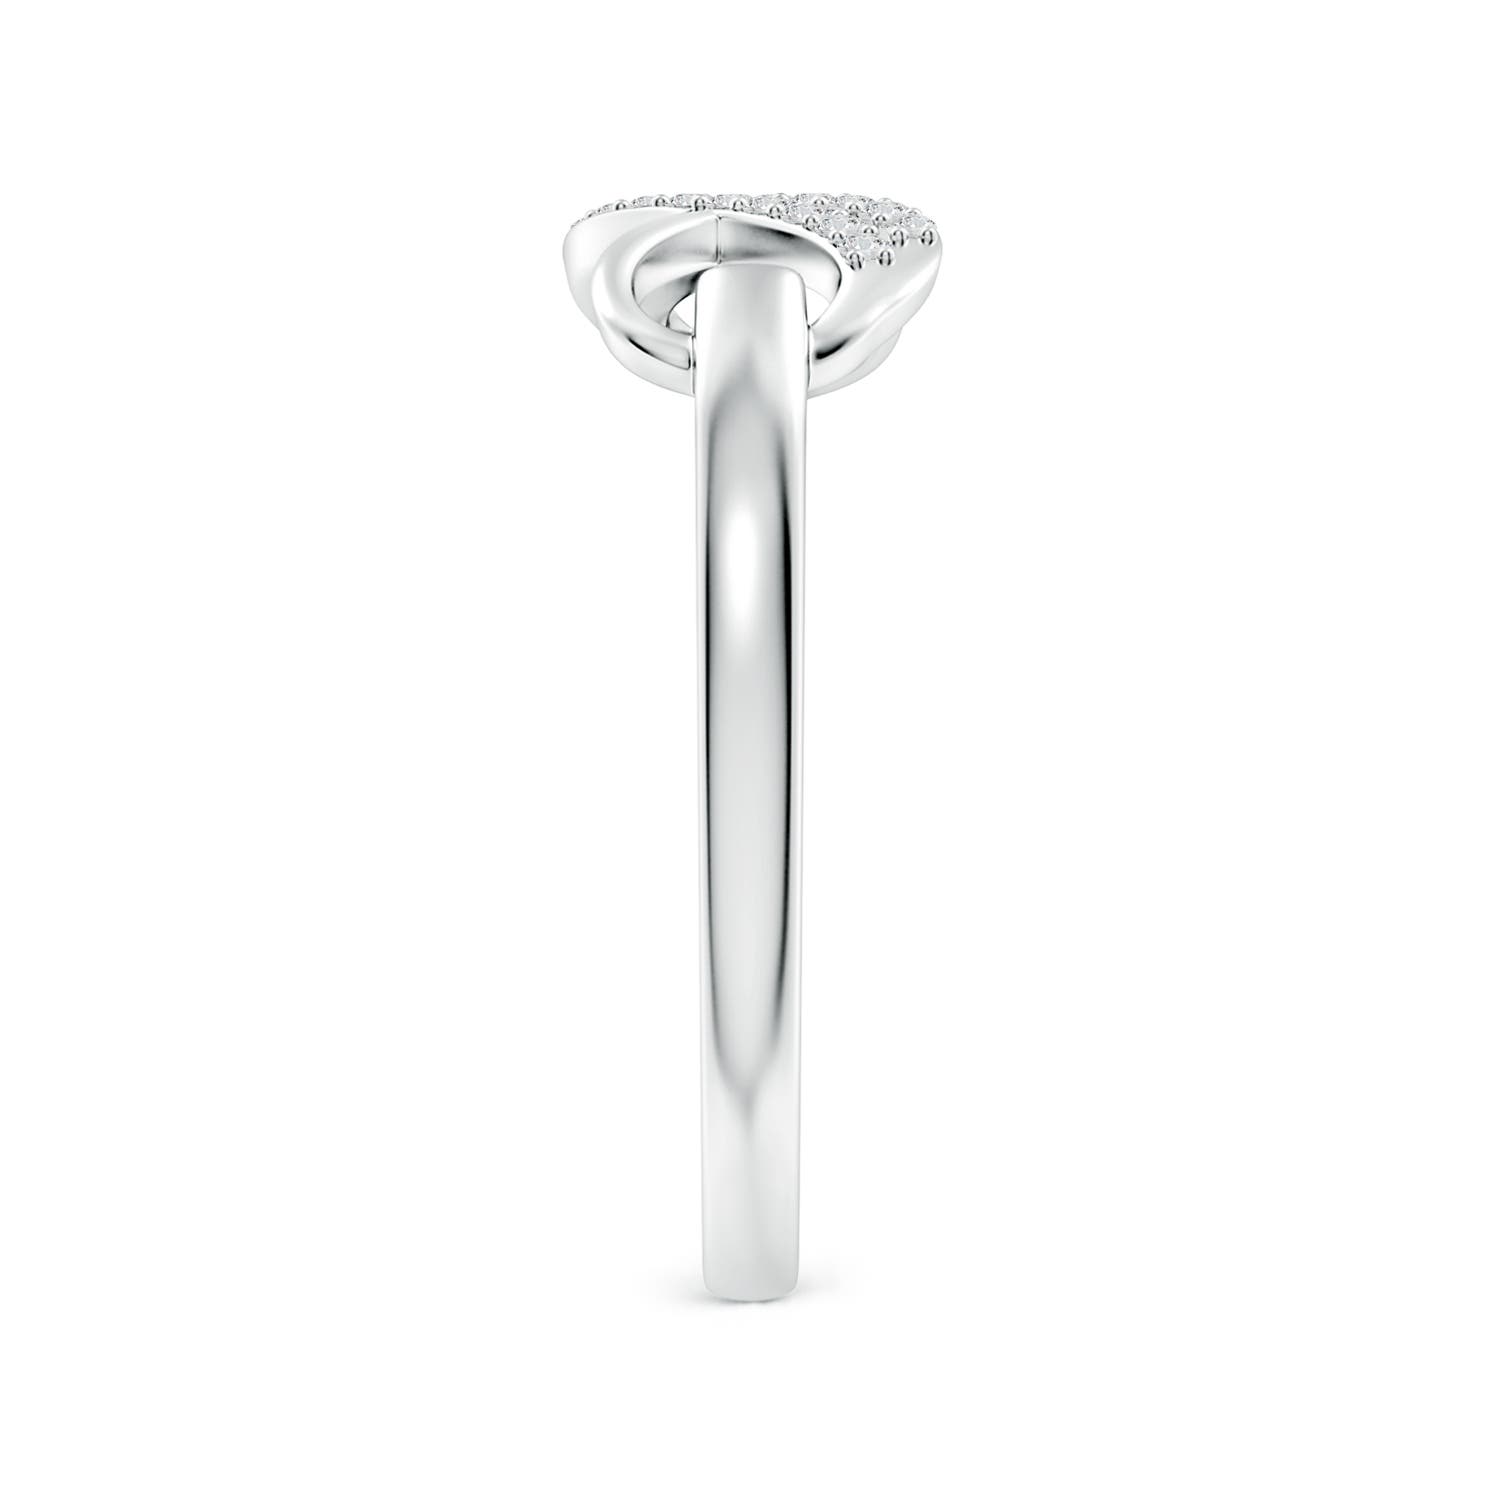 H, SI2 / 0.07 CT / 14 KT White Gold